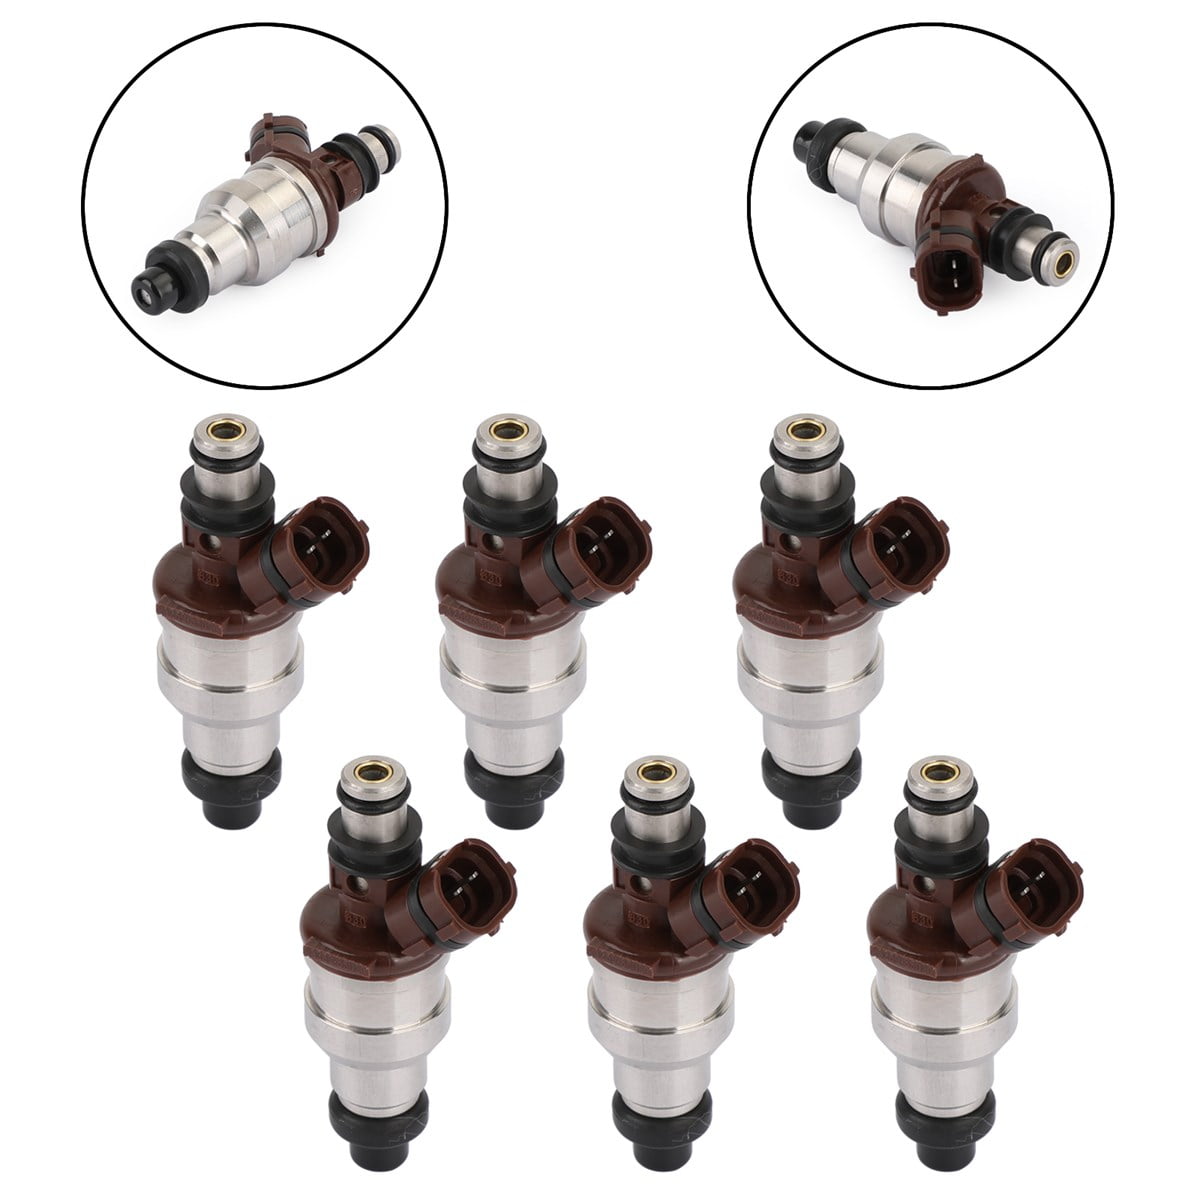 Toyota 4Runner Pickup 89-95 22RE 2.4L 4-hole upgrade fuel injectors set w/video 